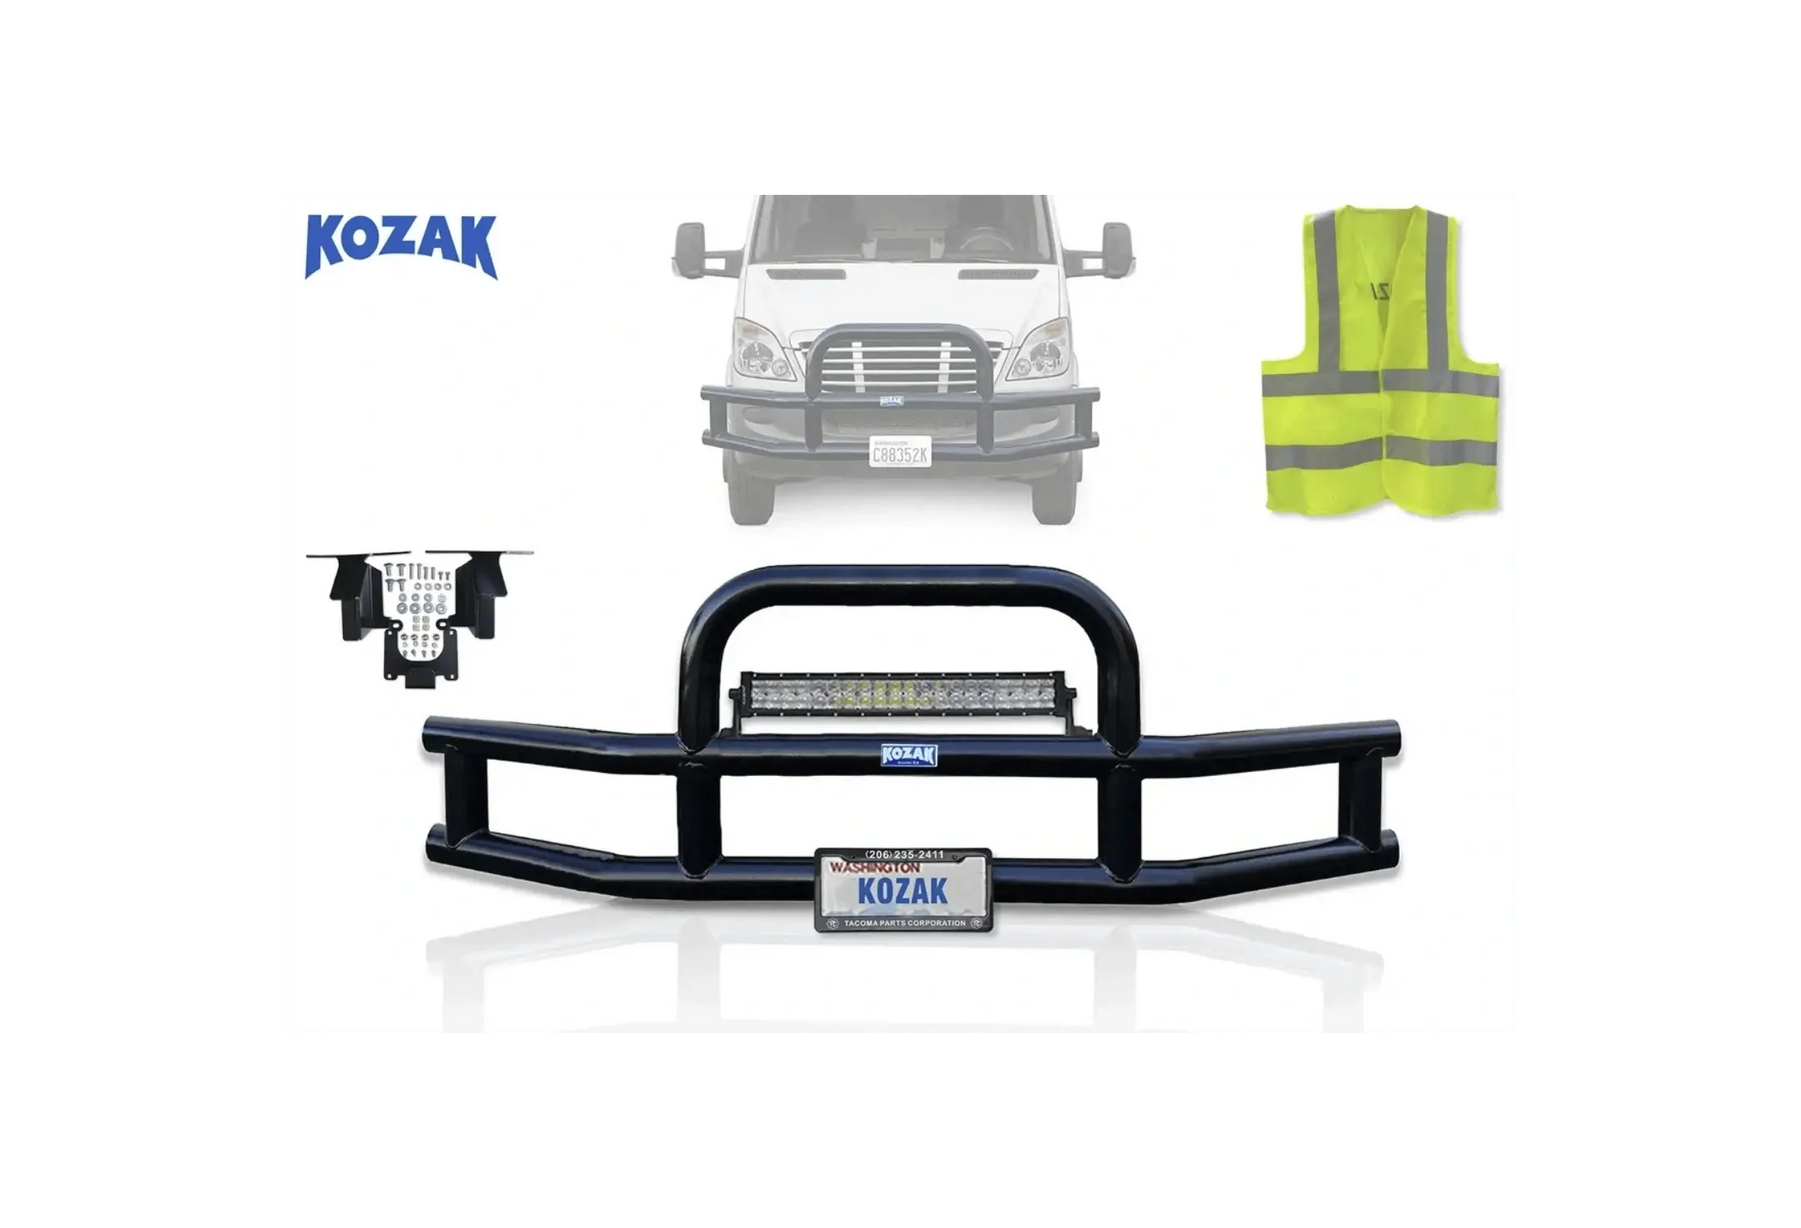 KOZAK 3-Inch Heavy Duty Round Bumper Grille Guard Compatible with Freightliner Sprinter Vans 2014-2017 PLUS your choice of LED lights, Mounting Brackets, License Plate Holder and Frame, KOZAK Vest